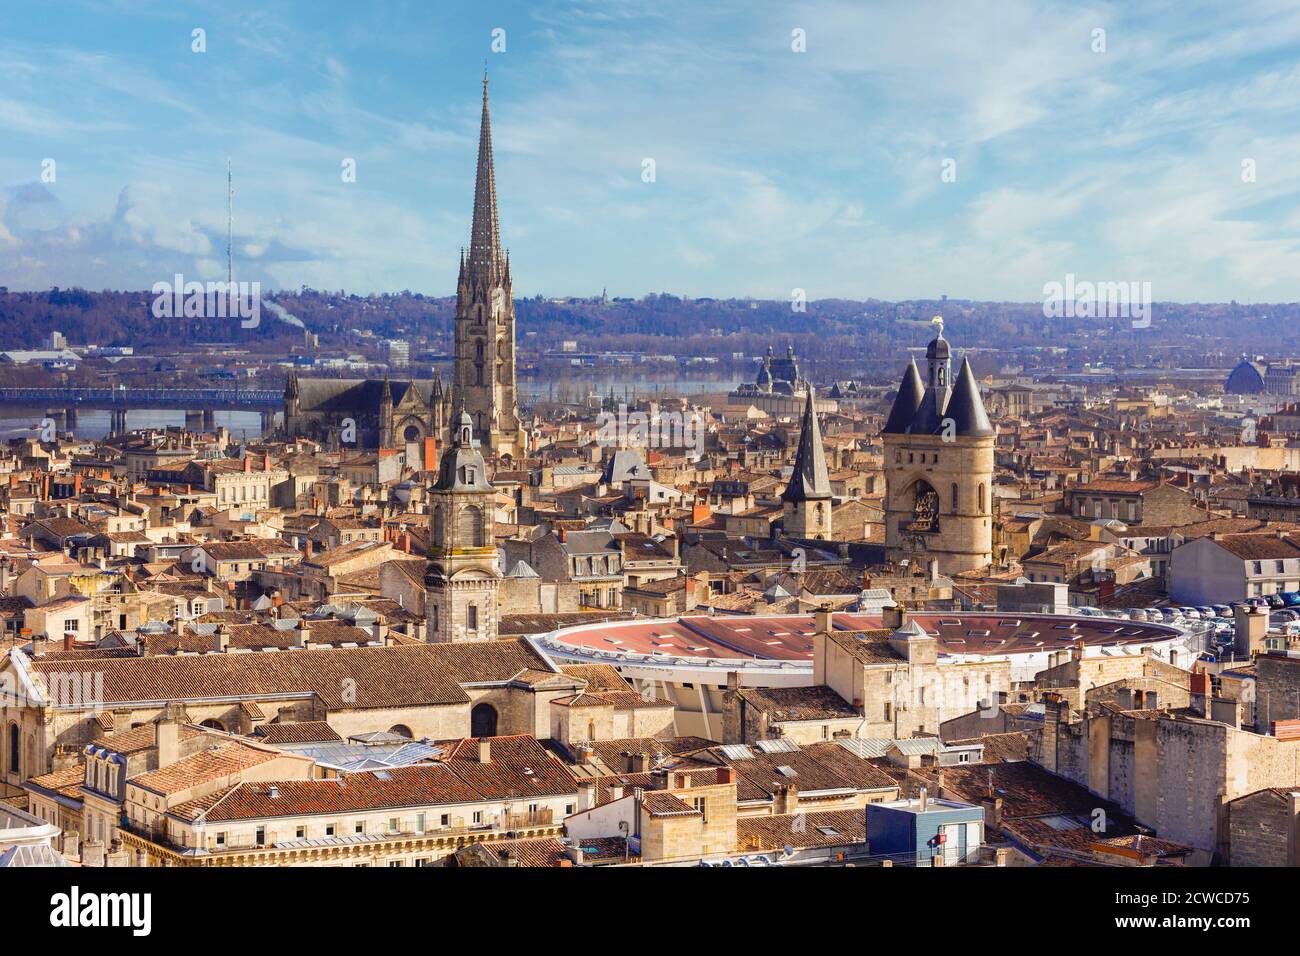 Bordeaux, Gironde Department, Aquitaine, France.   High view over rooftops to Porte de la Grosse Cloche and to its left the spire of St Eloi church. T Stock Photo